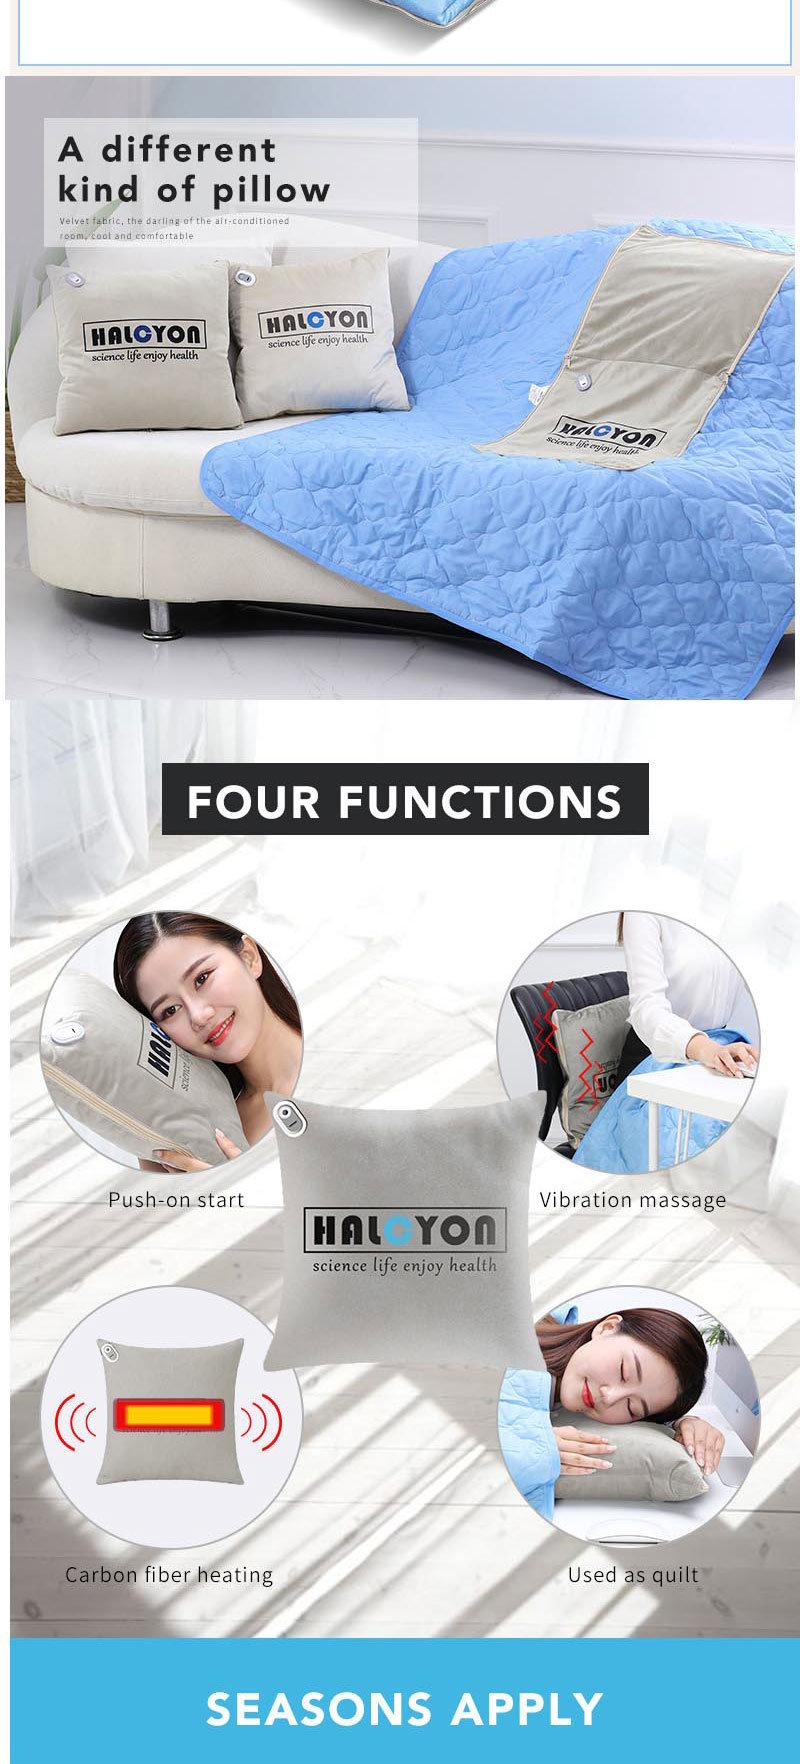 Hezheng Multifunctional Foldable Air Conditioning Blanket Throw Pillow 2 in 1 Amphibious Foldable Massage Blanket Pillow